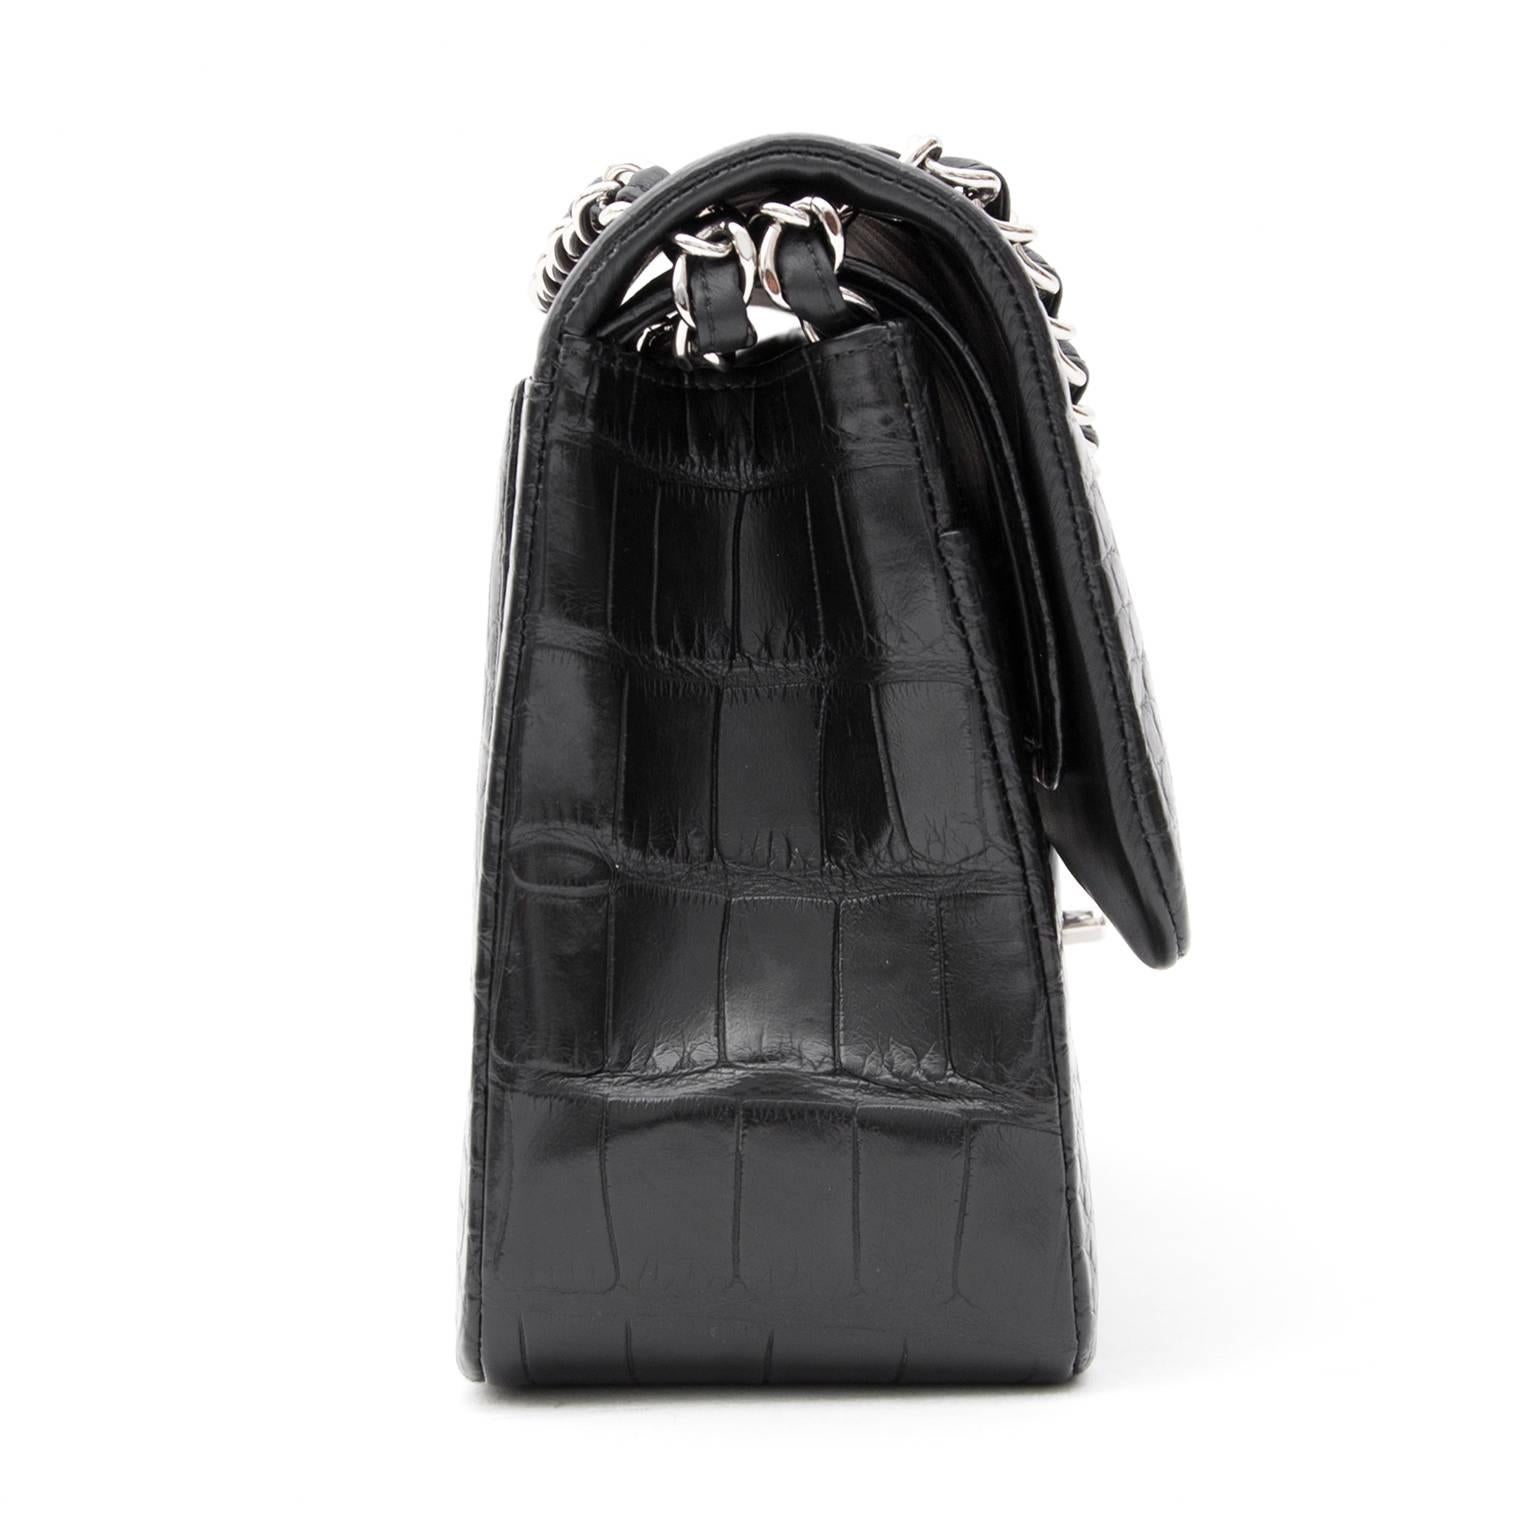 This stunning shoulder flap bag is superbly crafted of matte luxurious exotic 